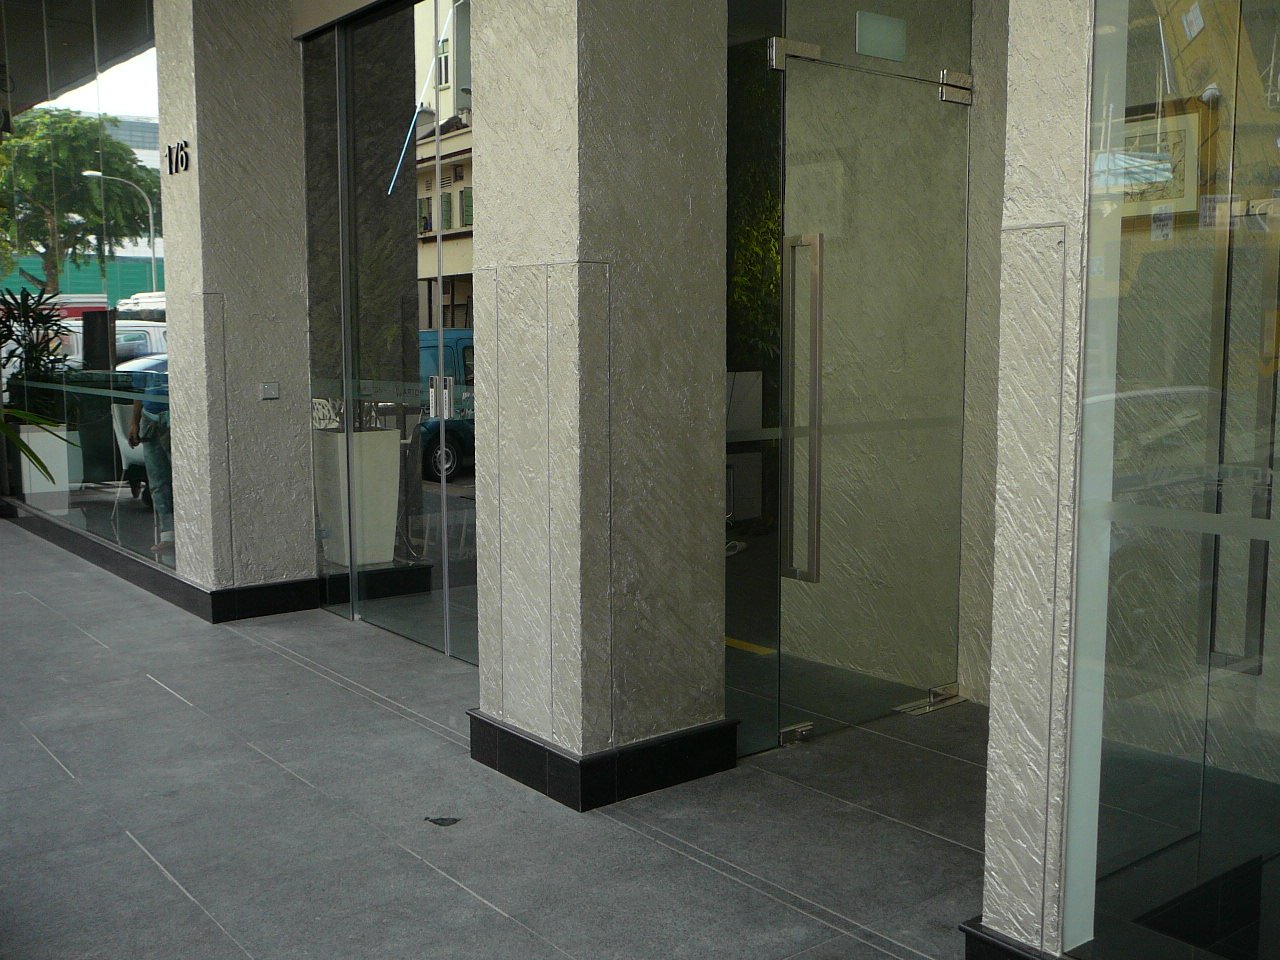 FastLogs installed in new hotel on Tyrwhitt Rd in Singapore. Photo: Double doors before deployment.